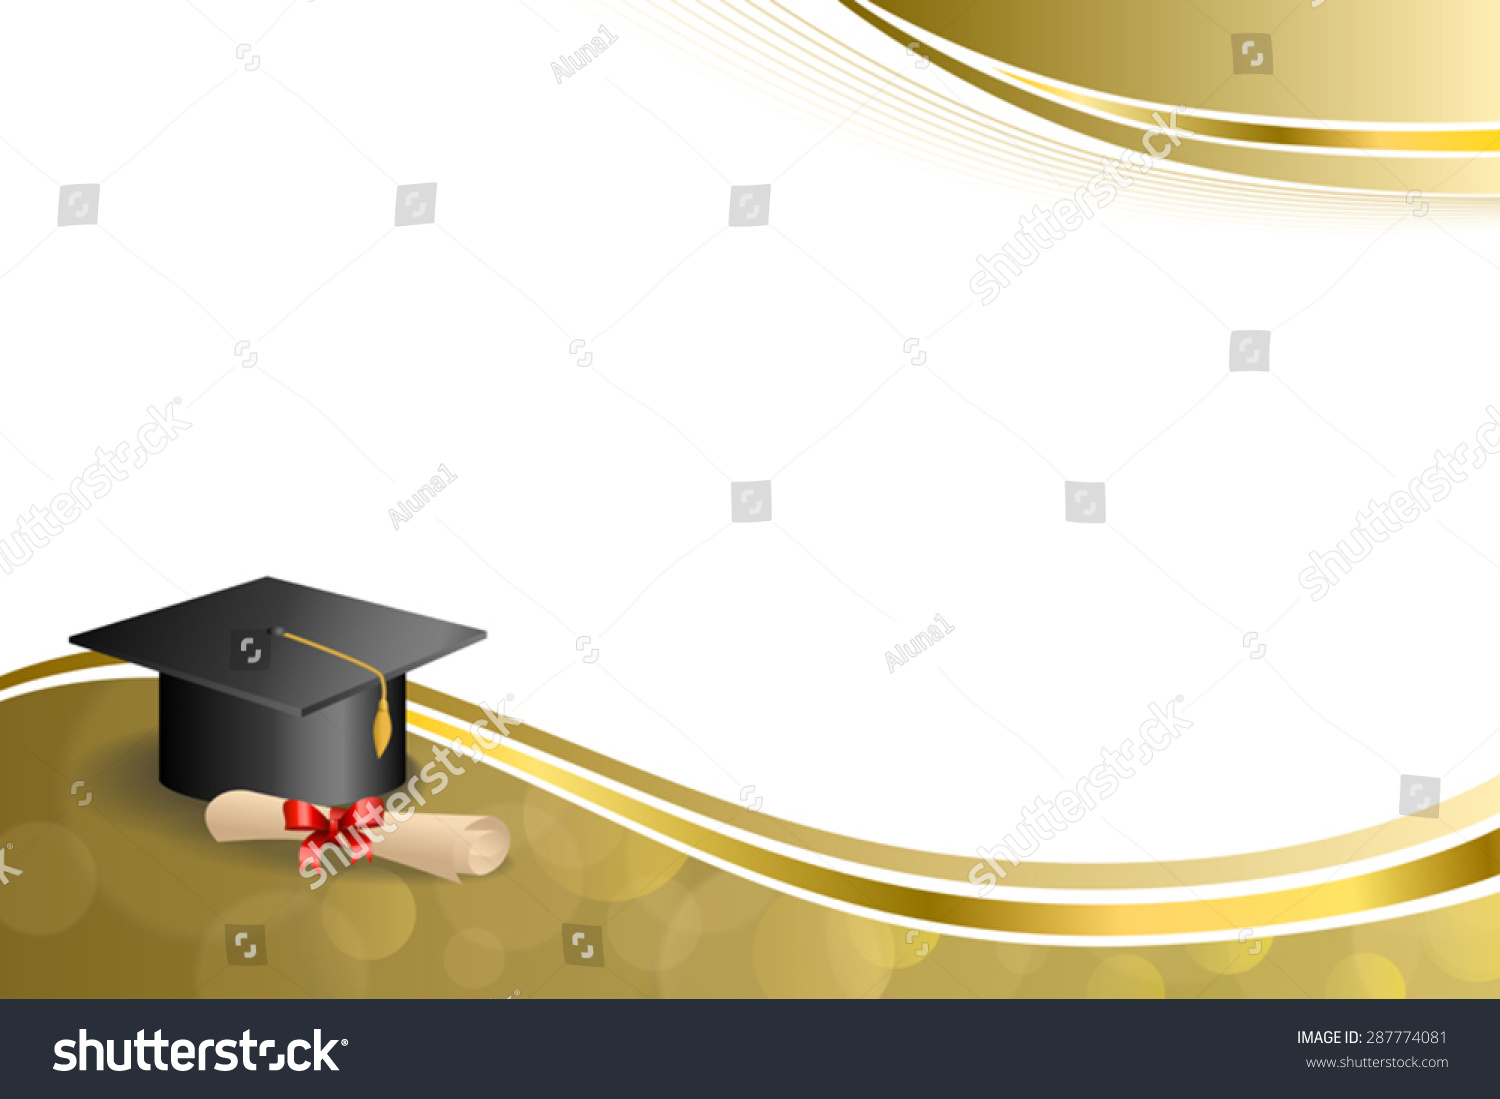 Background Abstract Beige Education Graduation Cap Diploma Red Bow Gold ...